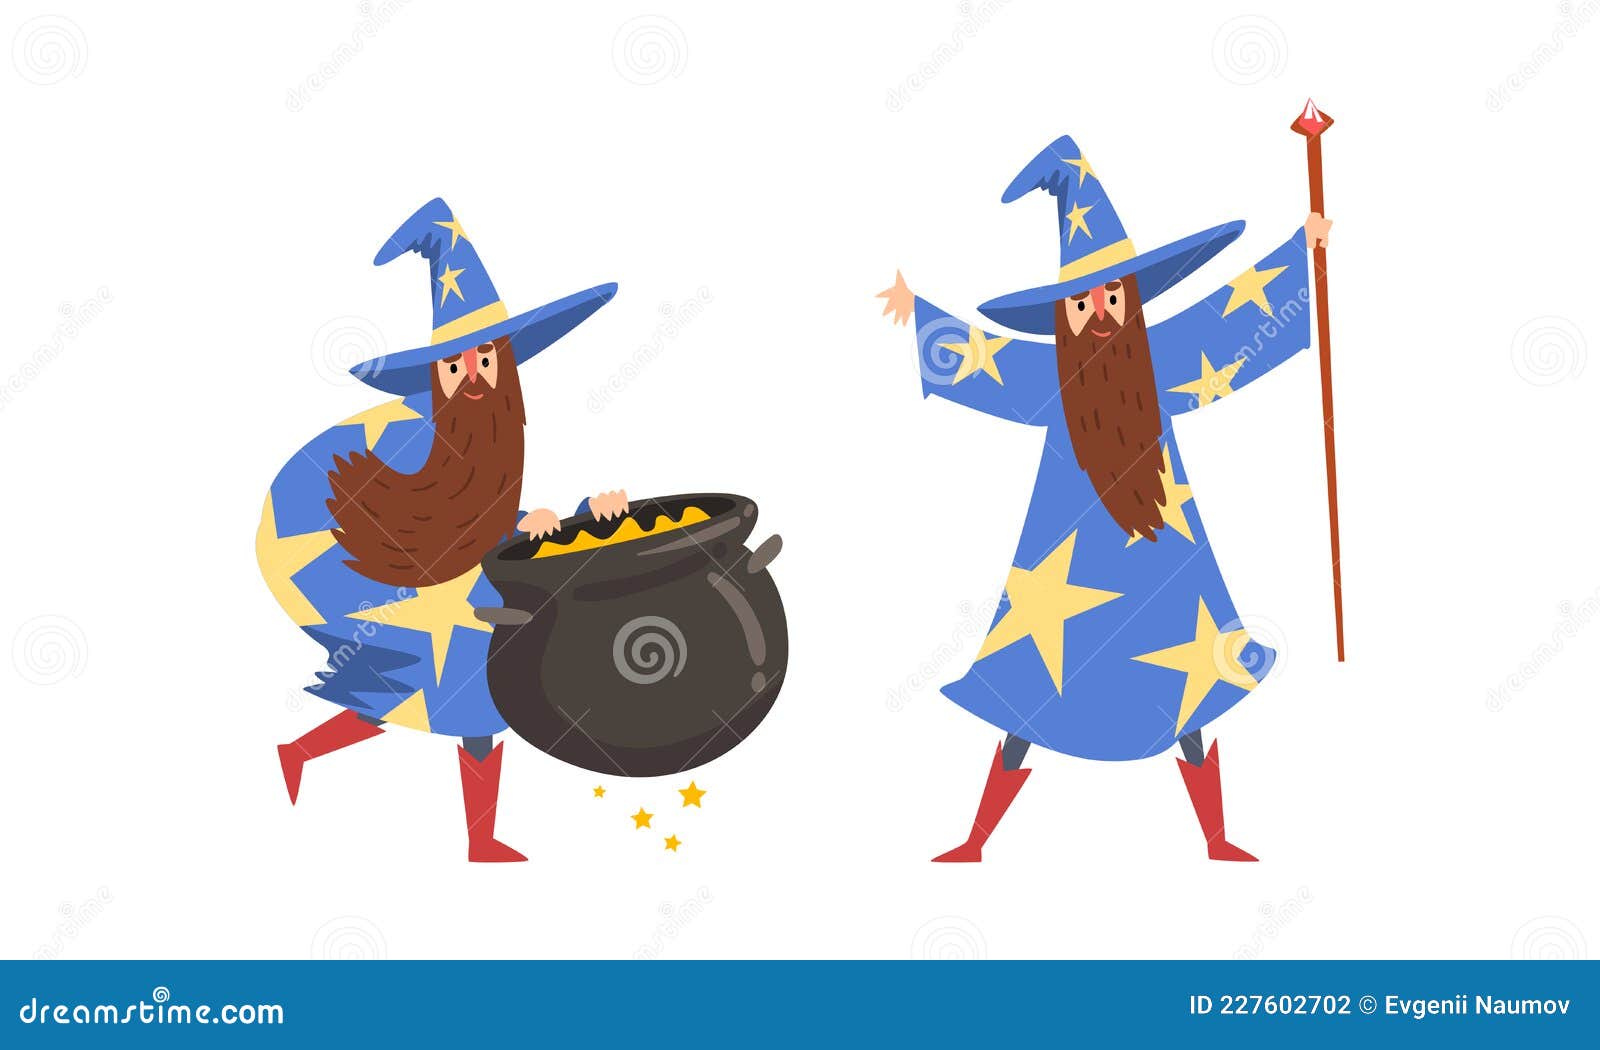 sorcerer in pointed hat and starry gown practicing wizardry and witchcraft with magic stick and cauldron  set